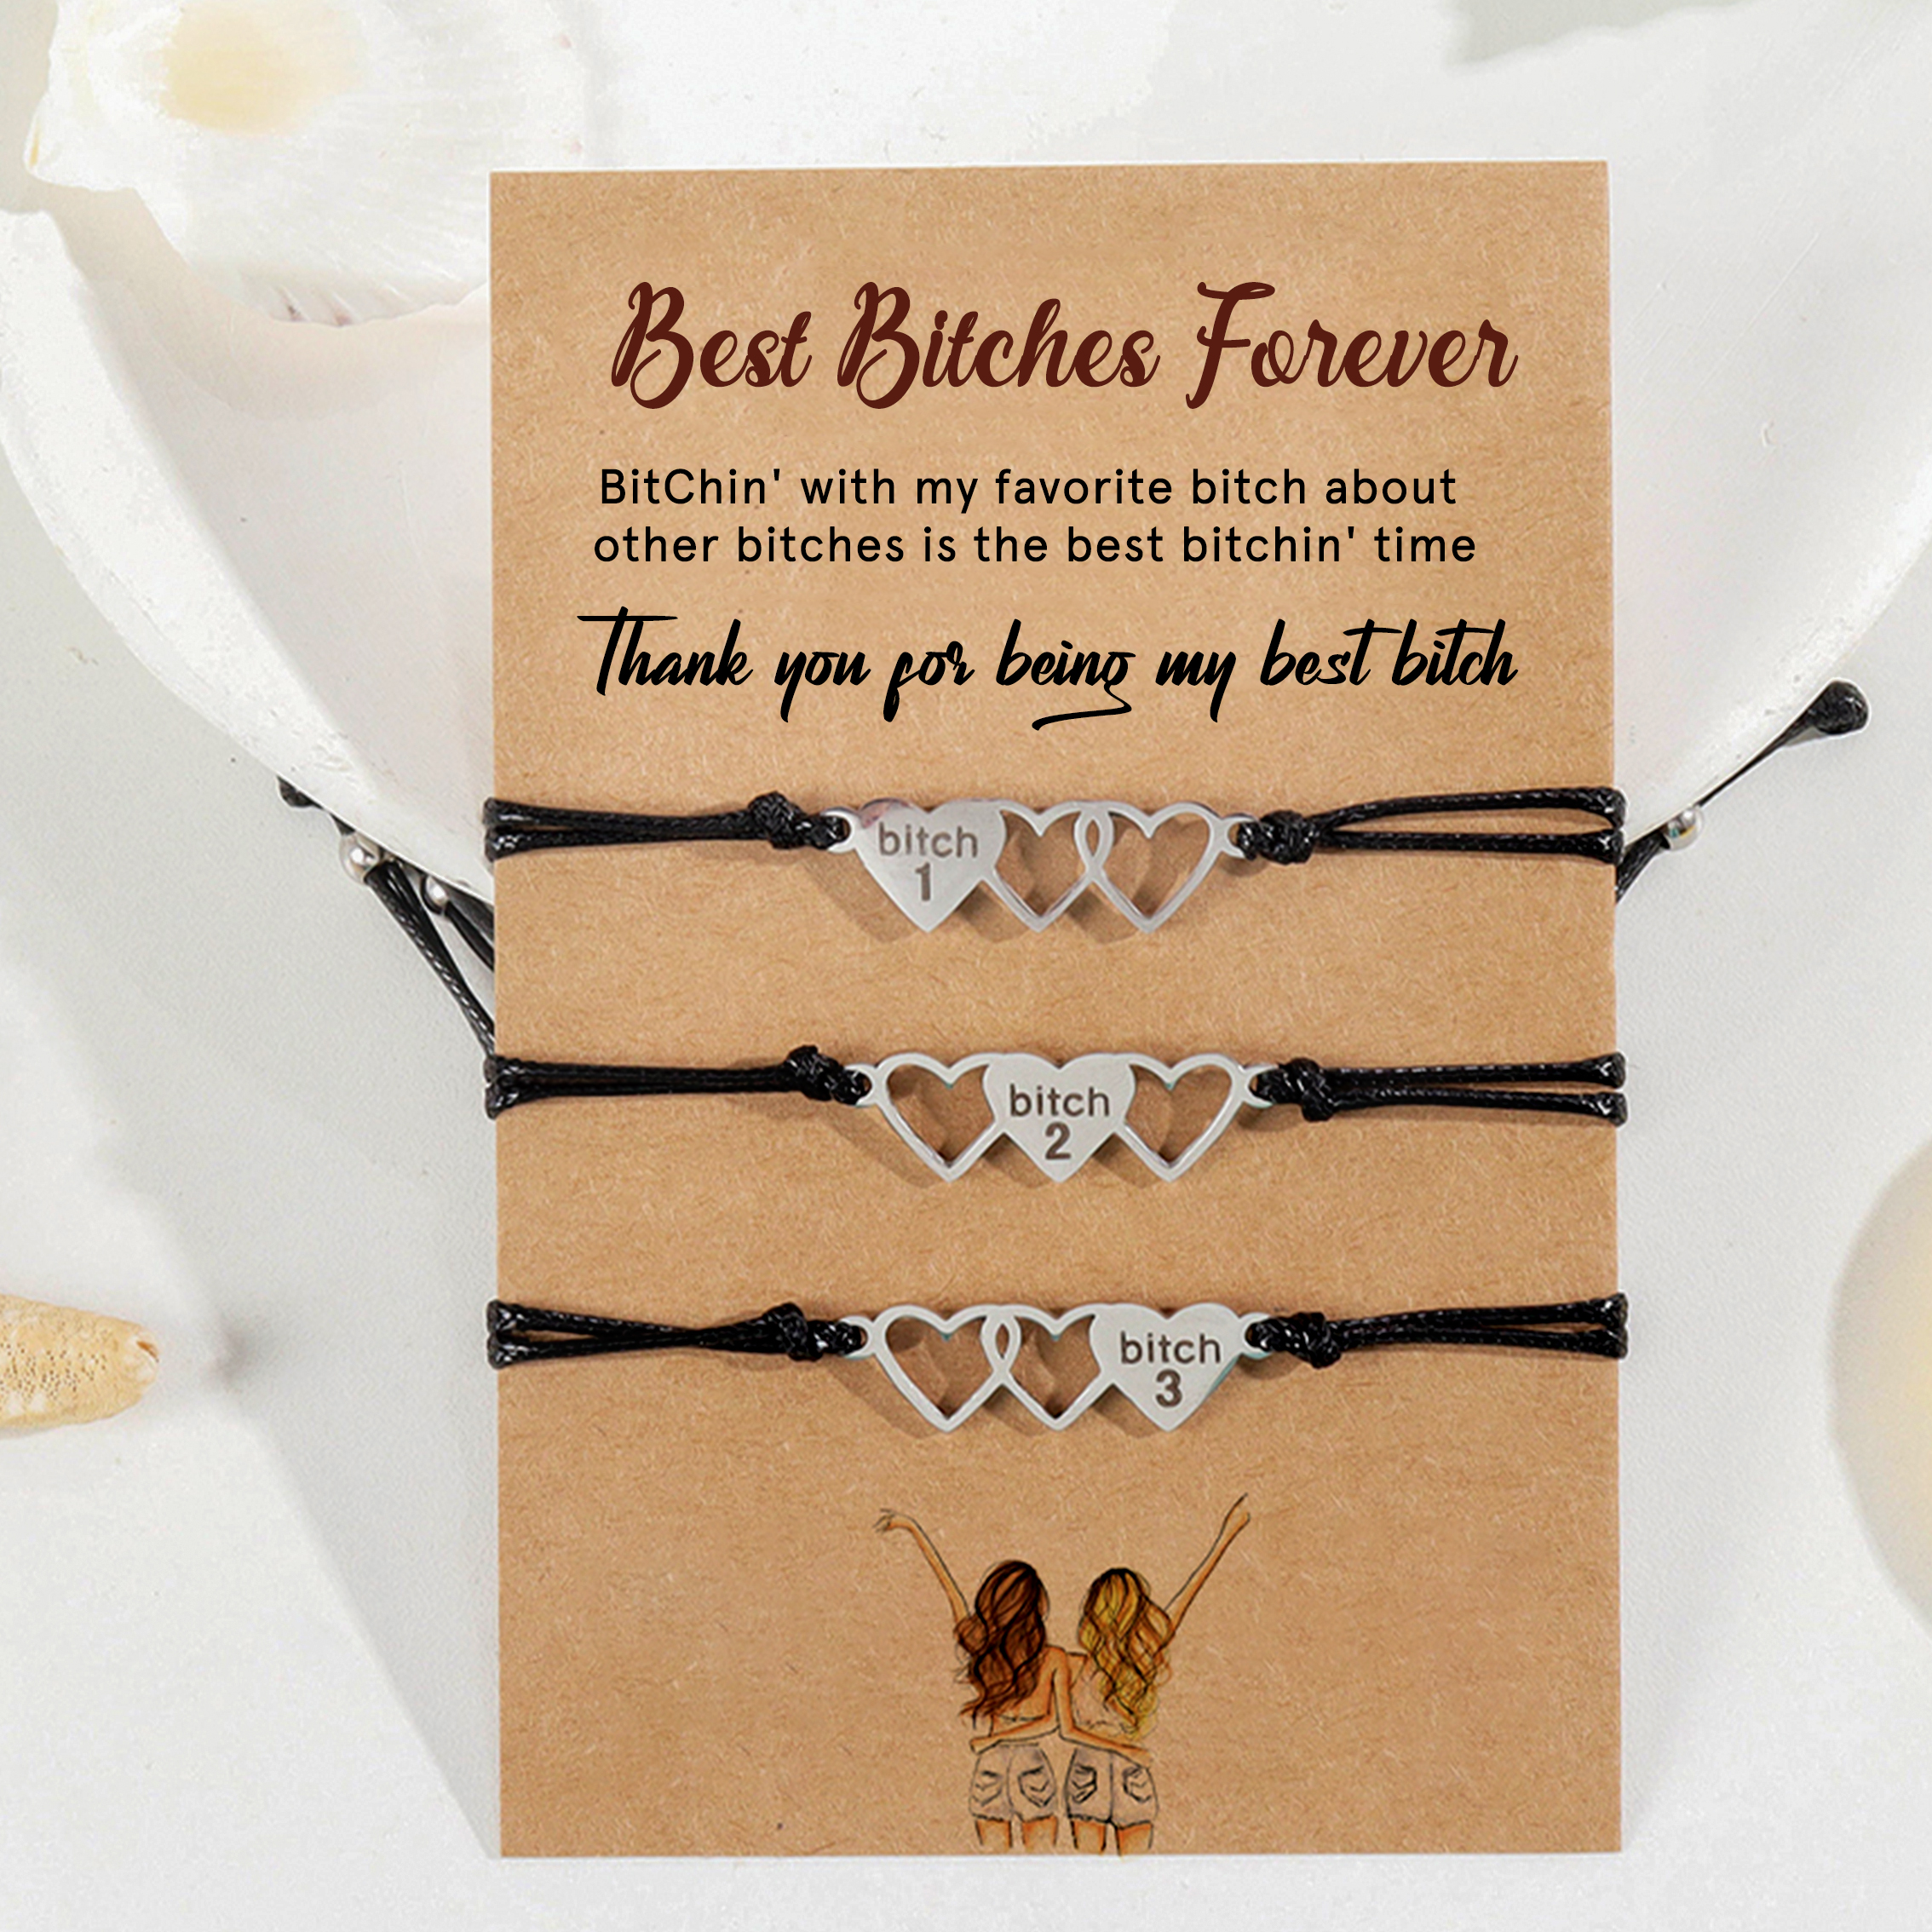 For Friend -Best Bitches Forever Braided Bracelet